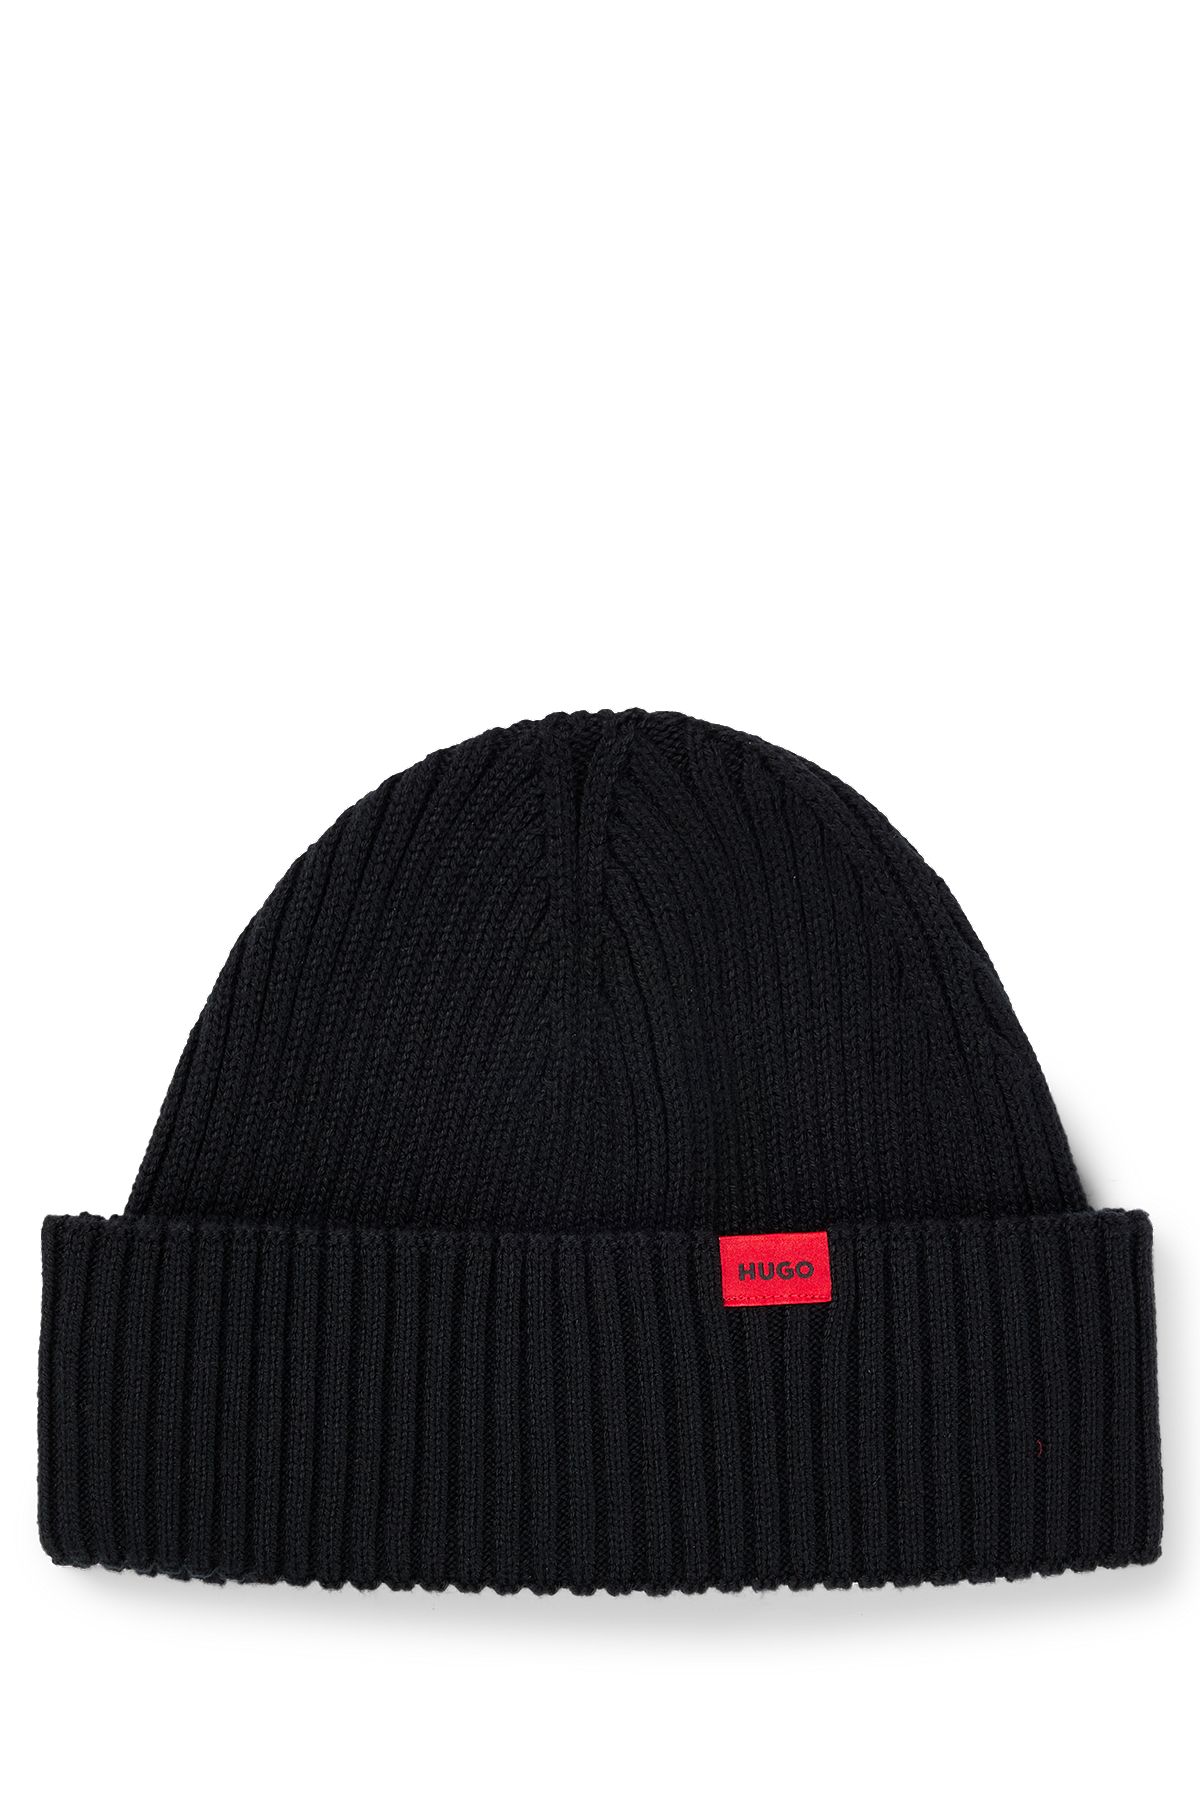 red logo hat - beanie HUGO label Ribbed with